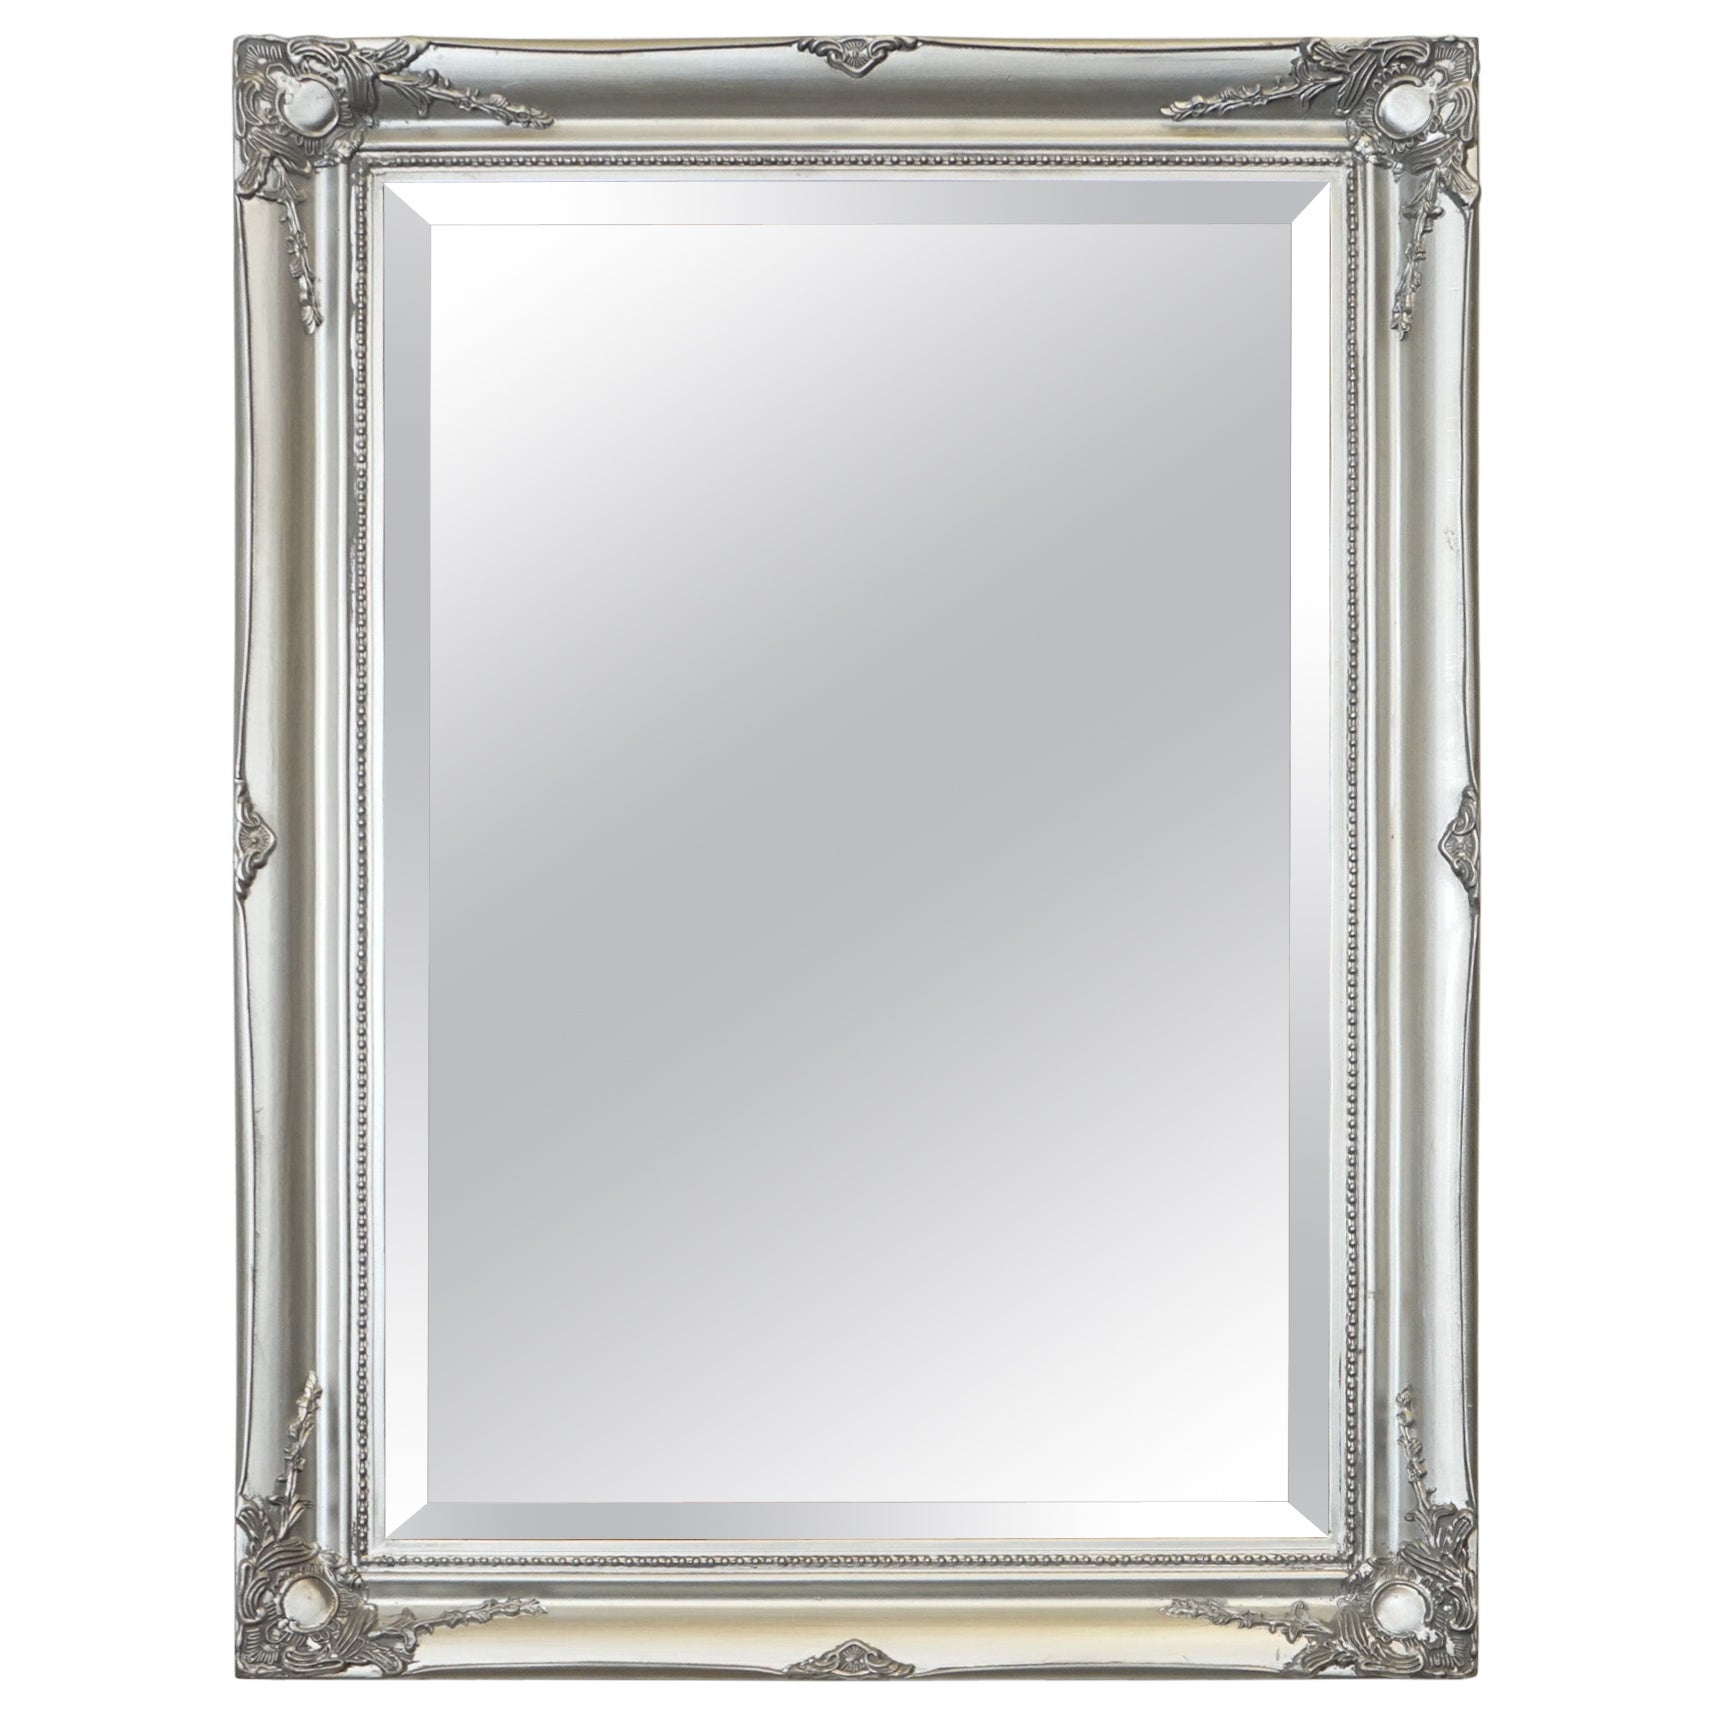 LOVELY SILVER FRENCH COUNTRY STYLE BEVELLED MIRROR j1